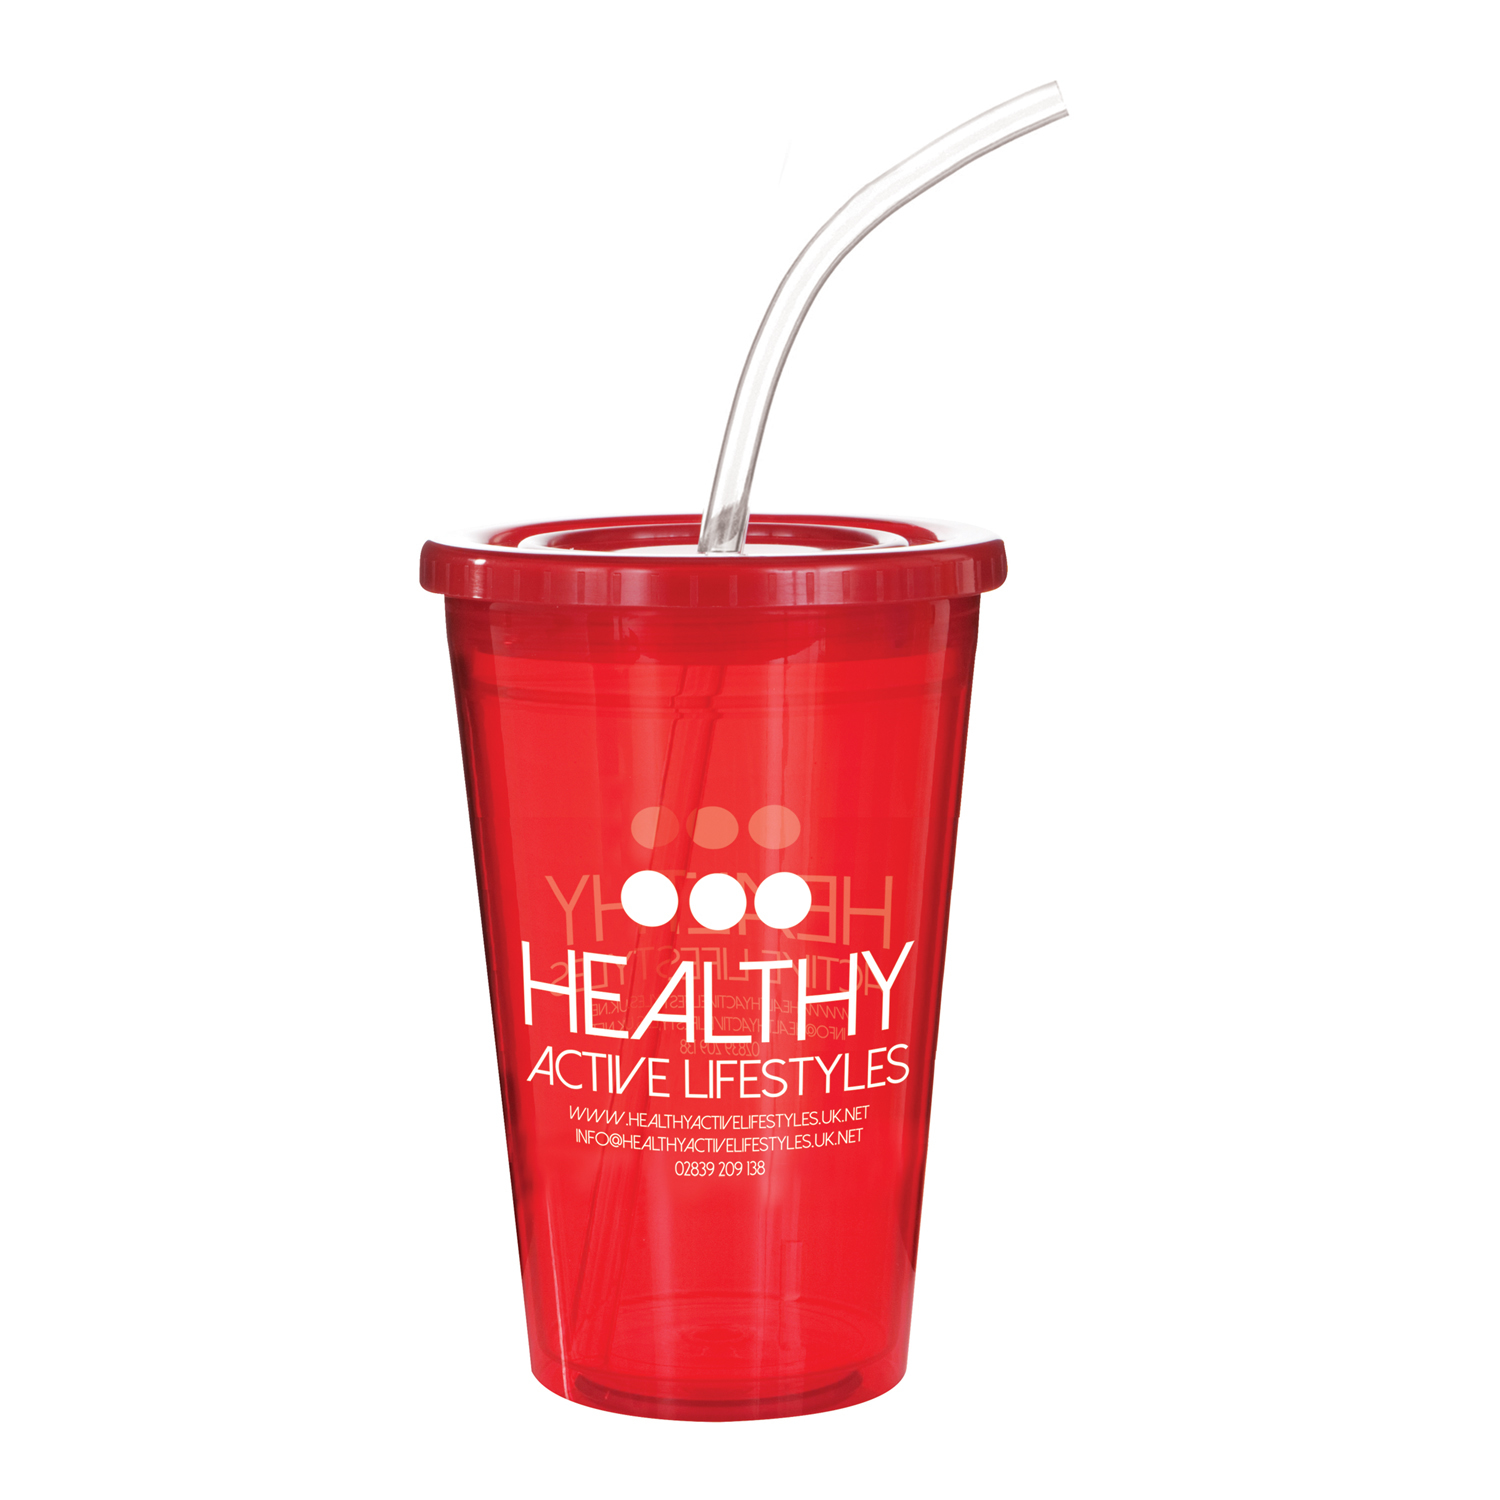 Stadium cup in red with matching lid and clear straw and large wrap around print